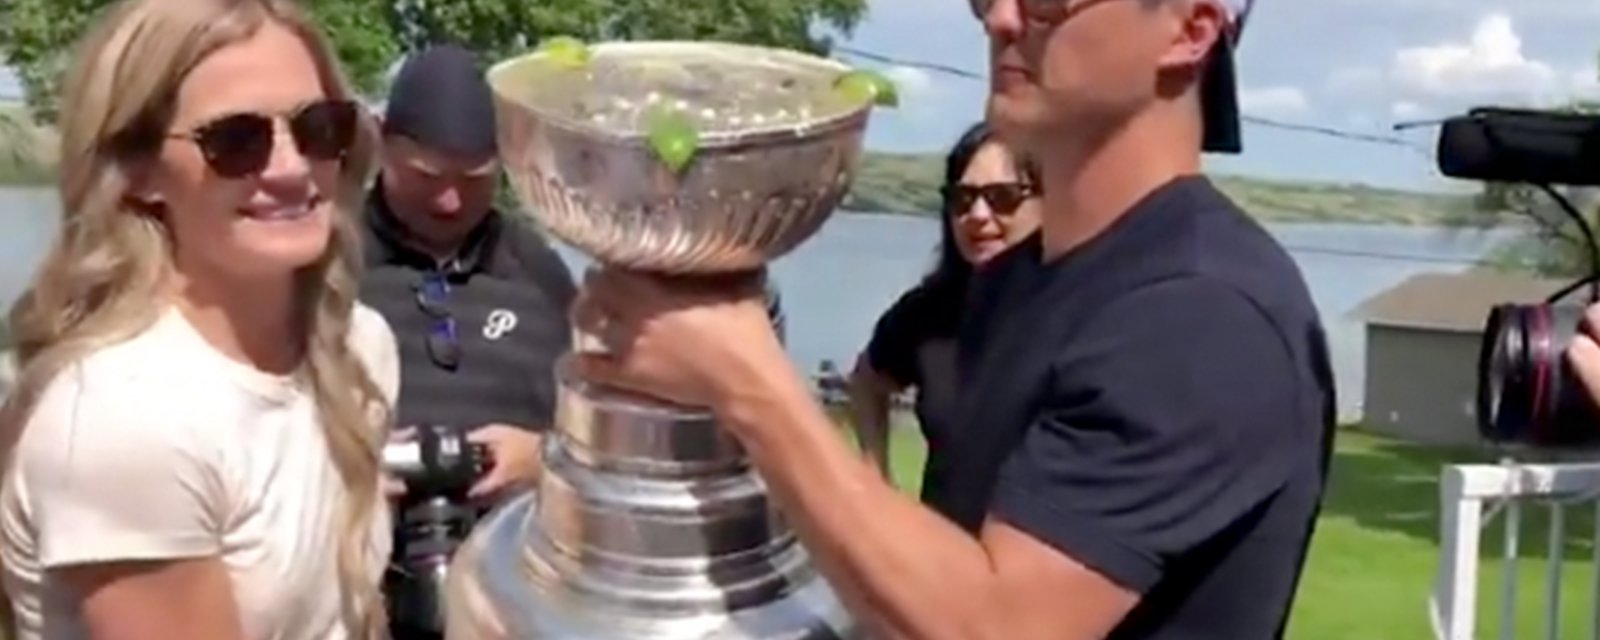 Tyler and Molly Bozak create the most epic margarita of all time!